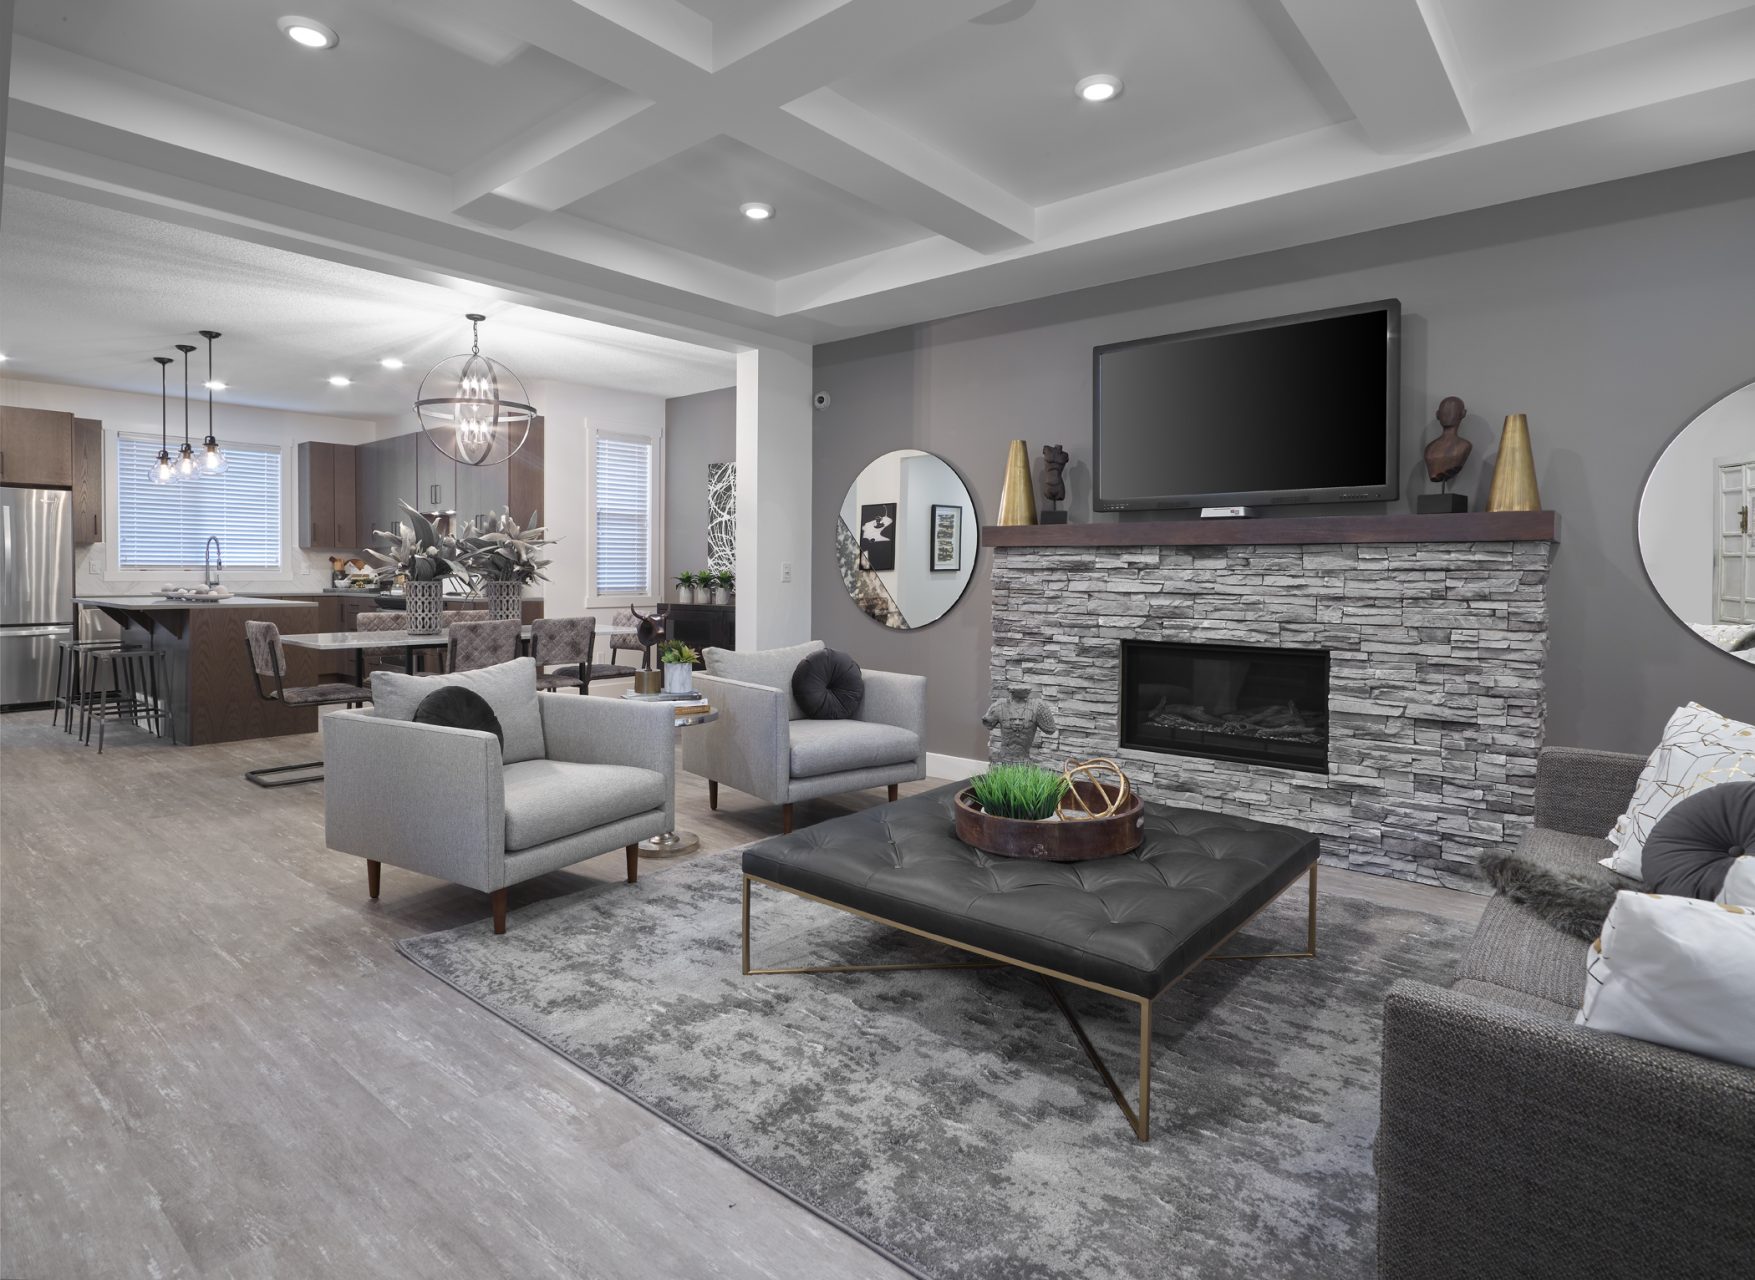 living area and kitchen in griesbach showhome